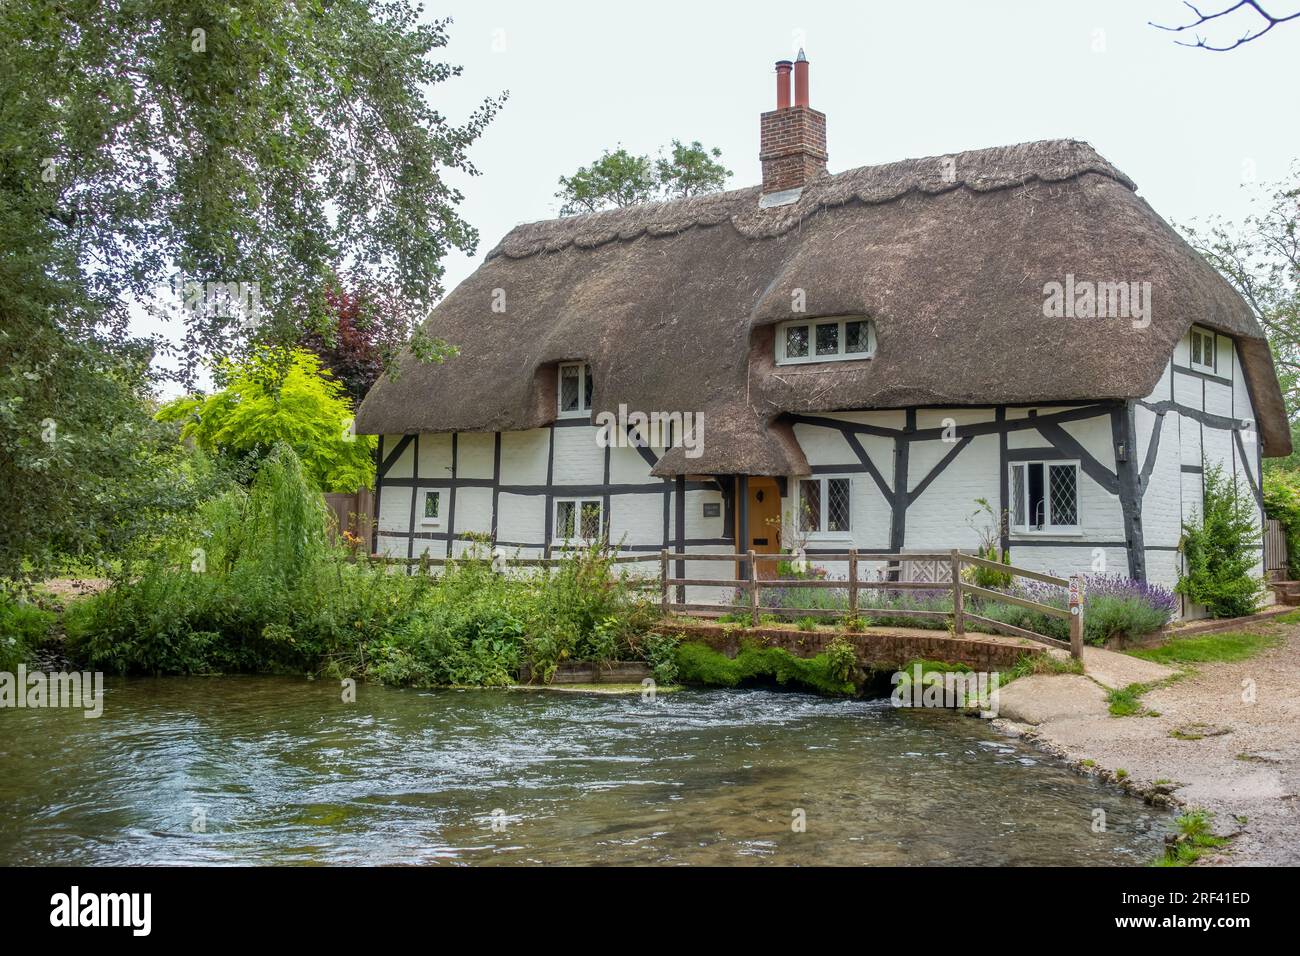 The Fulling Mill across the River Alre in Alresford Hampshire England Stock Photo